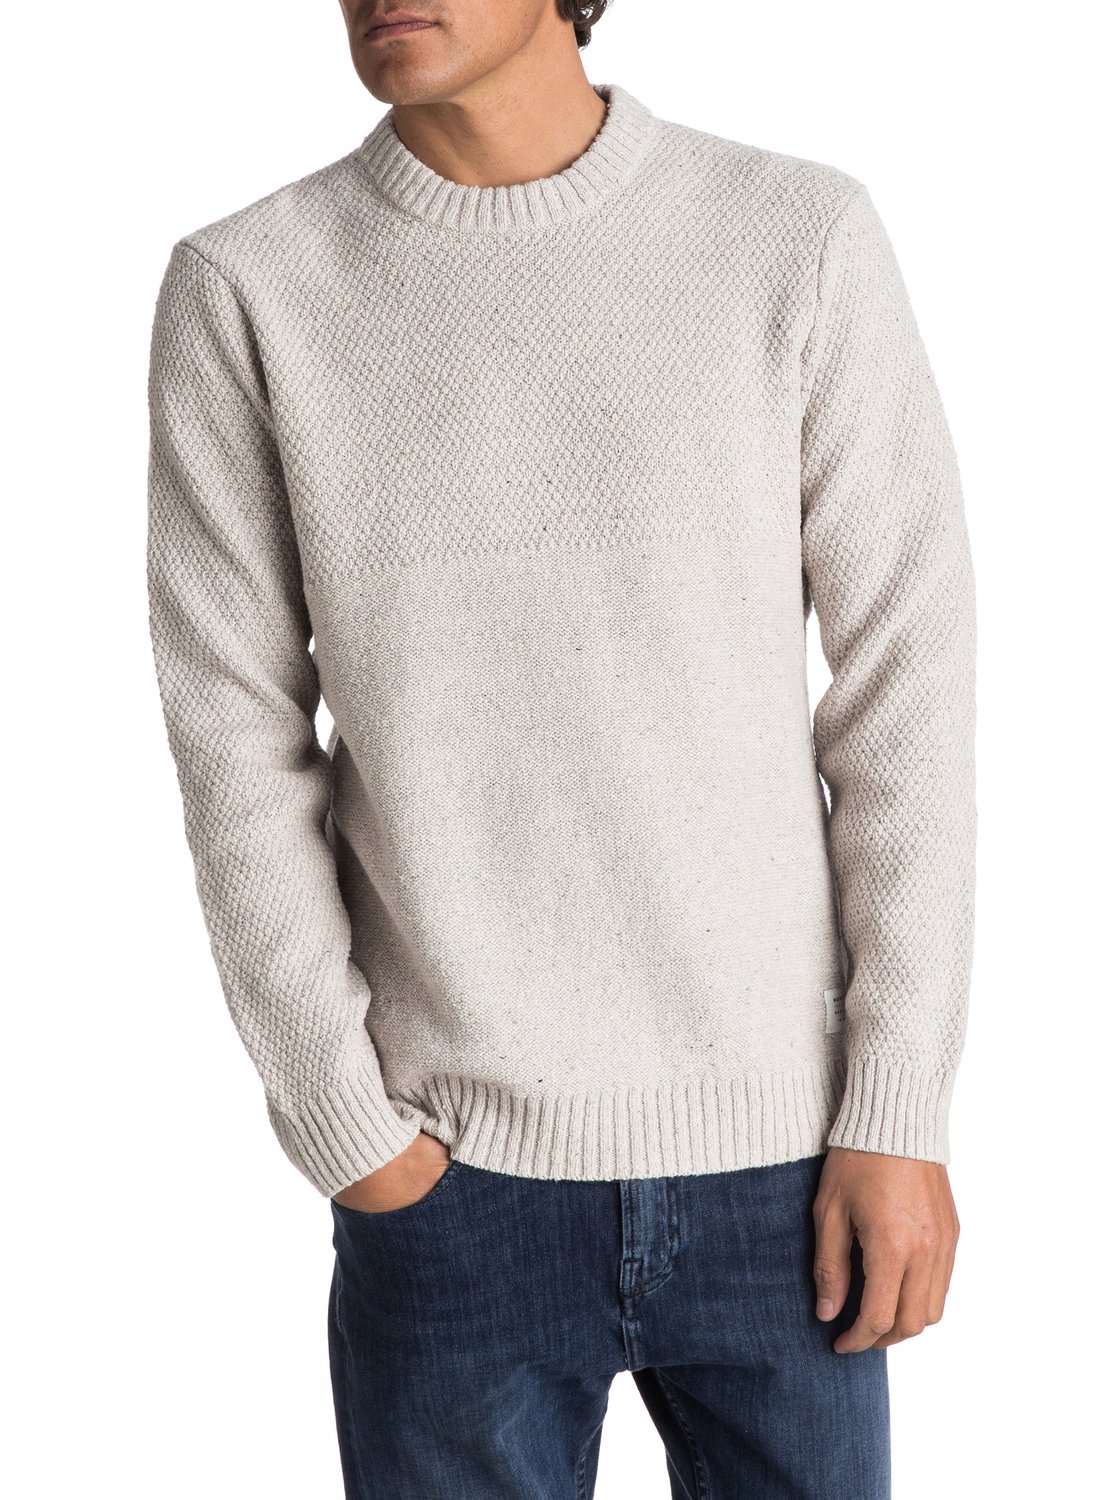 Panuku - Pull pour Homme - Quiksilver